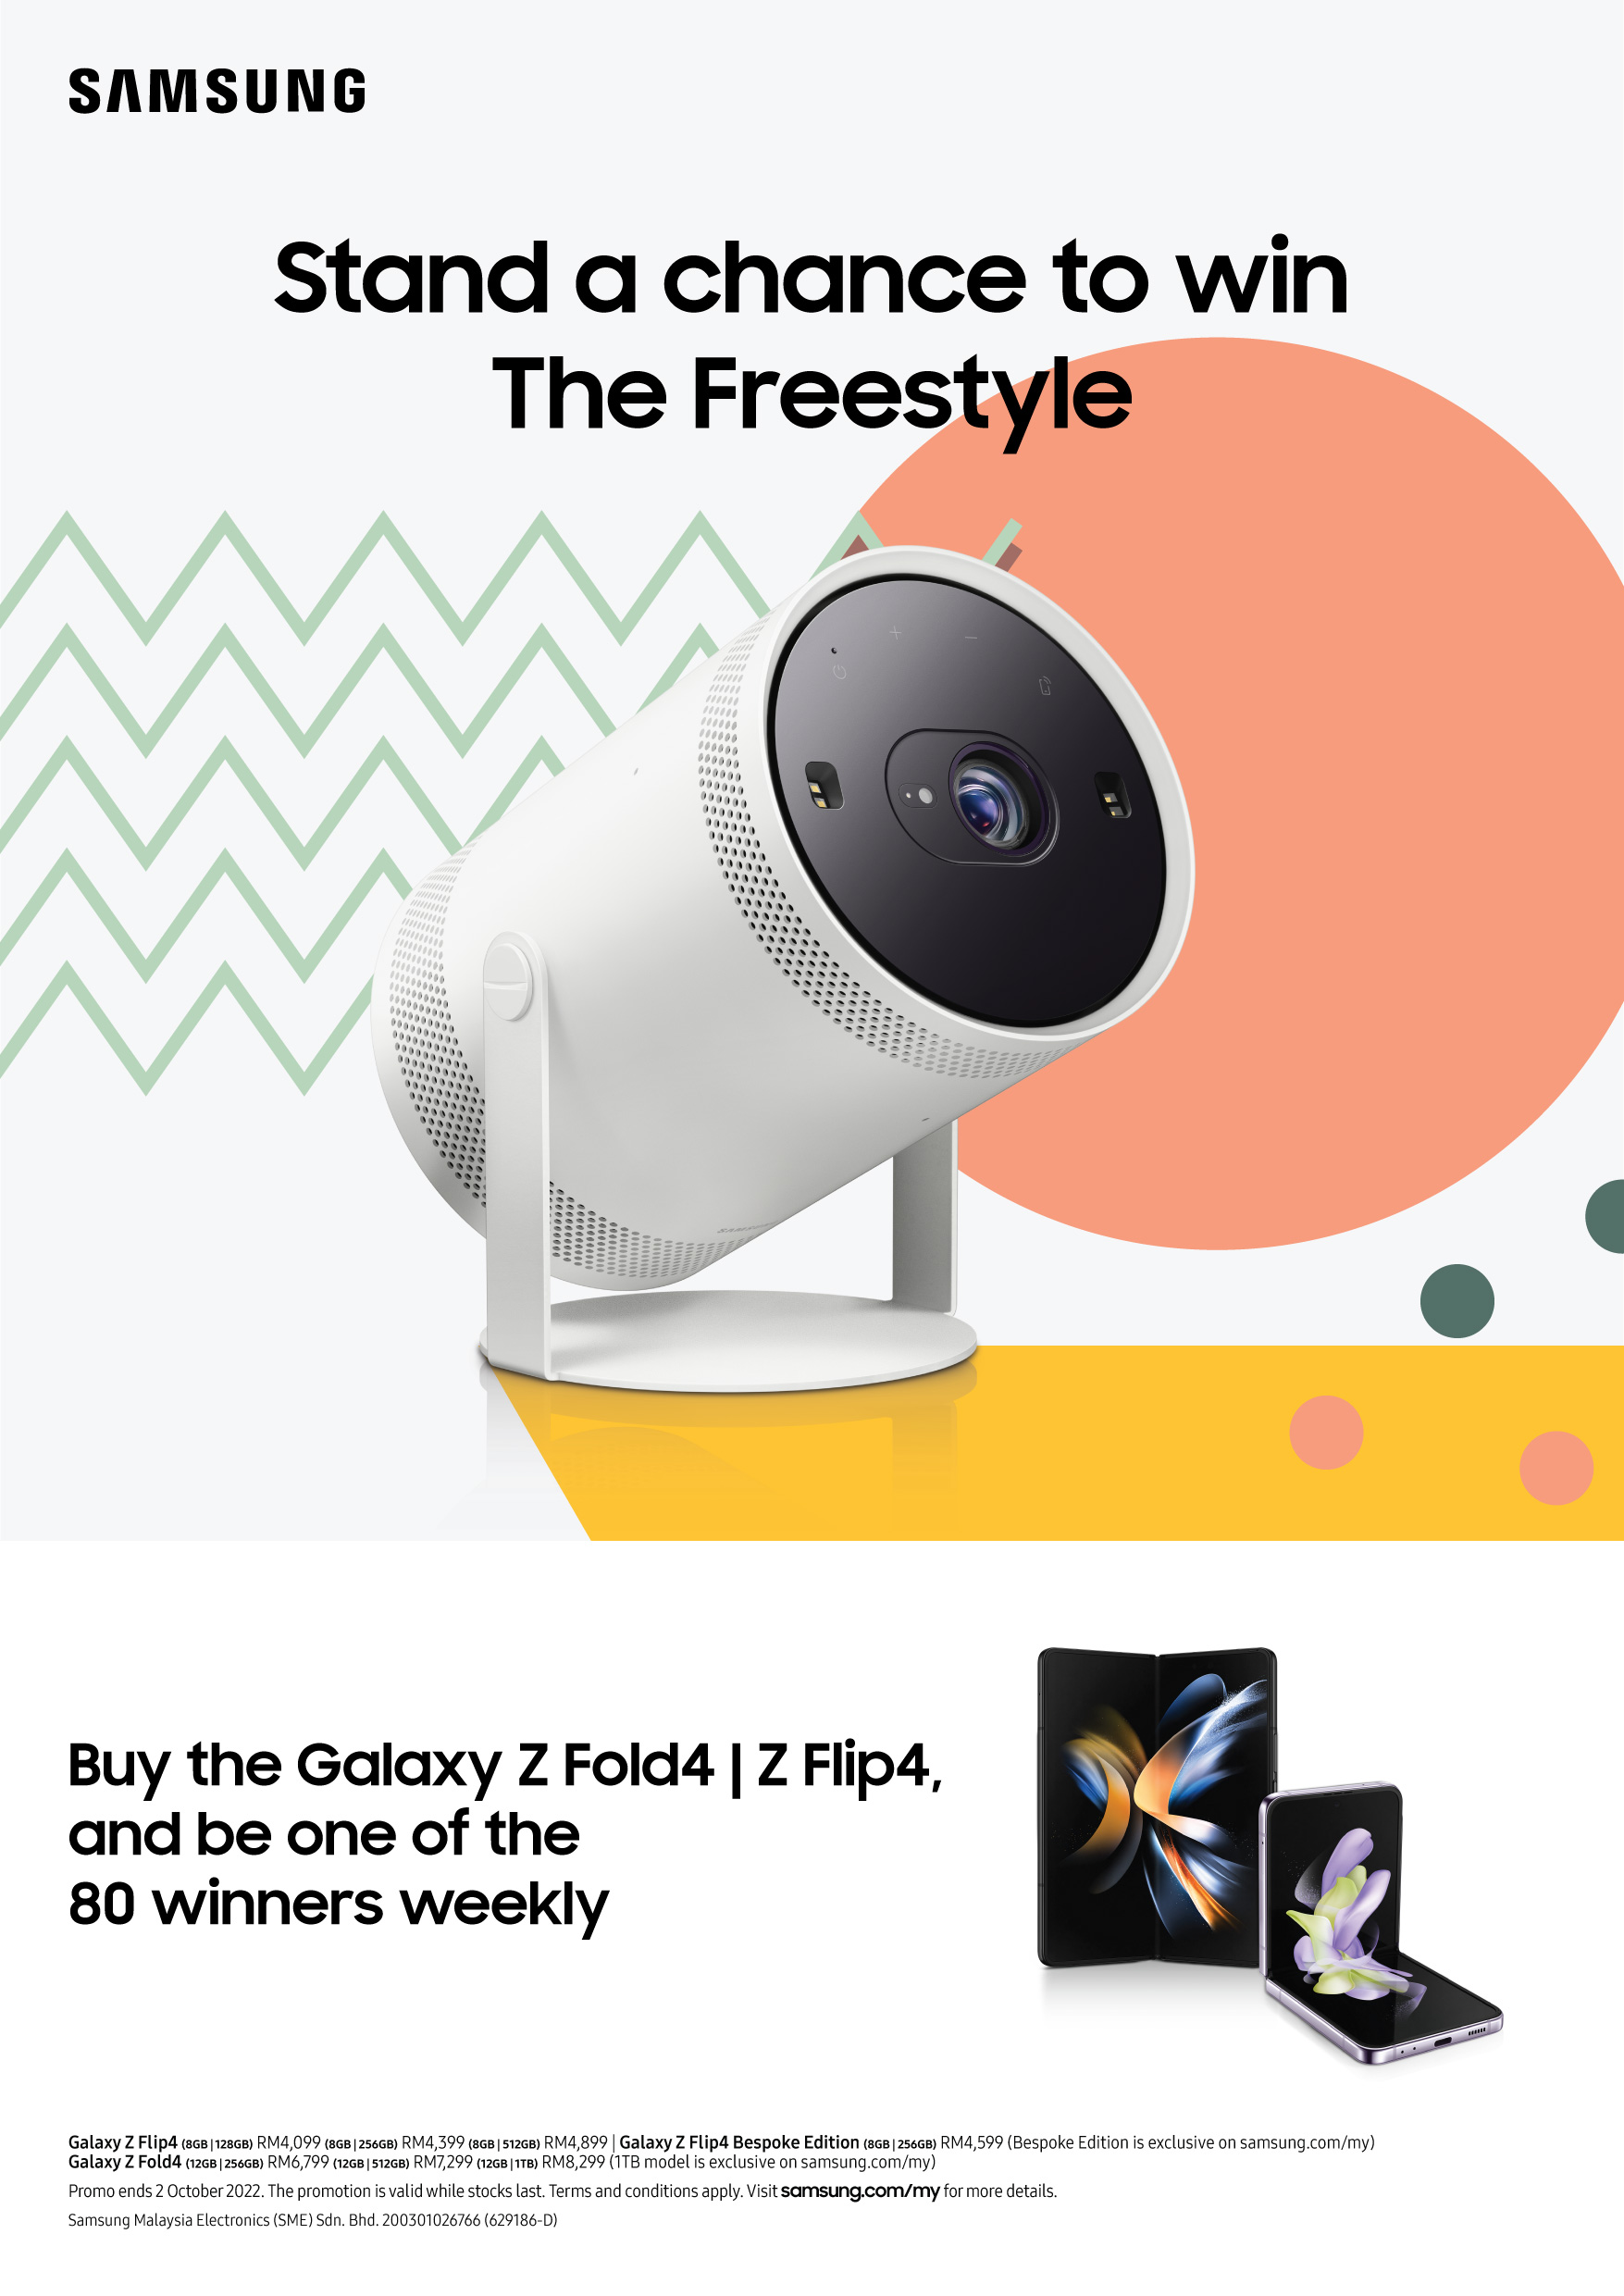 Galaxy Z Flip4 and Galaxy Z Fold4 Offer Win The Freestyle KV